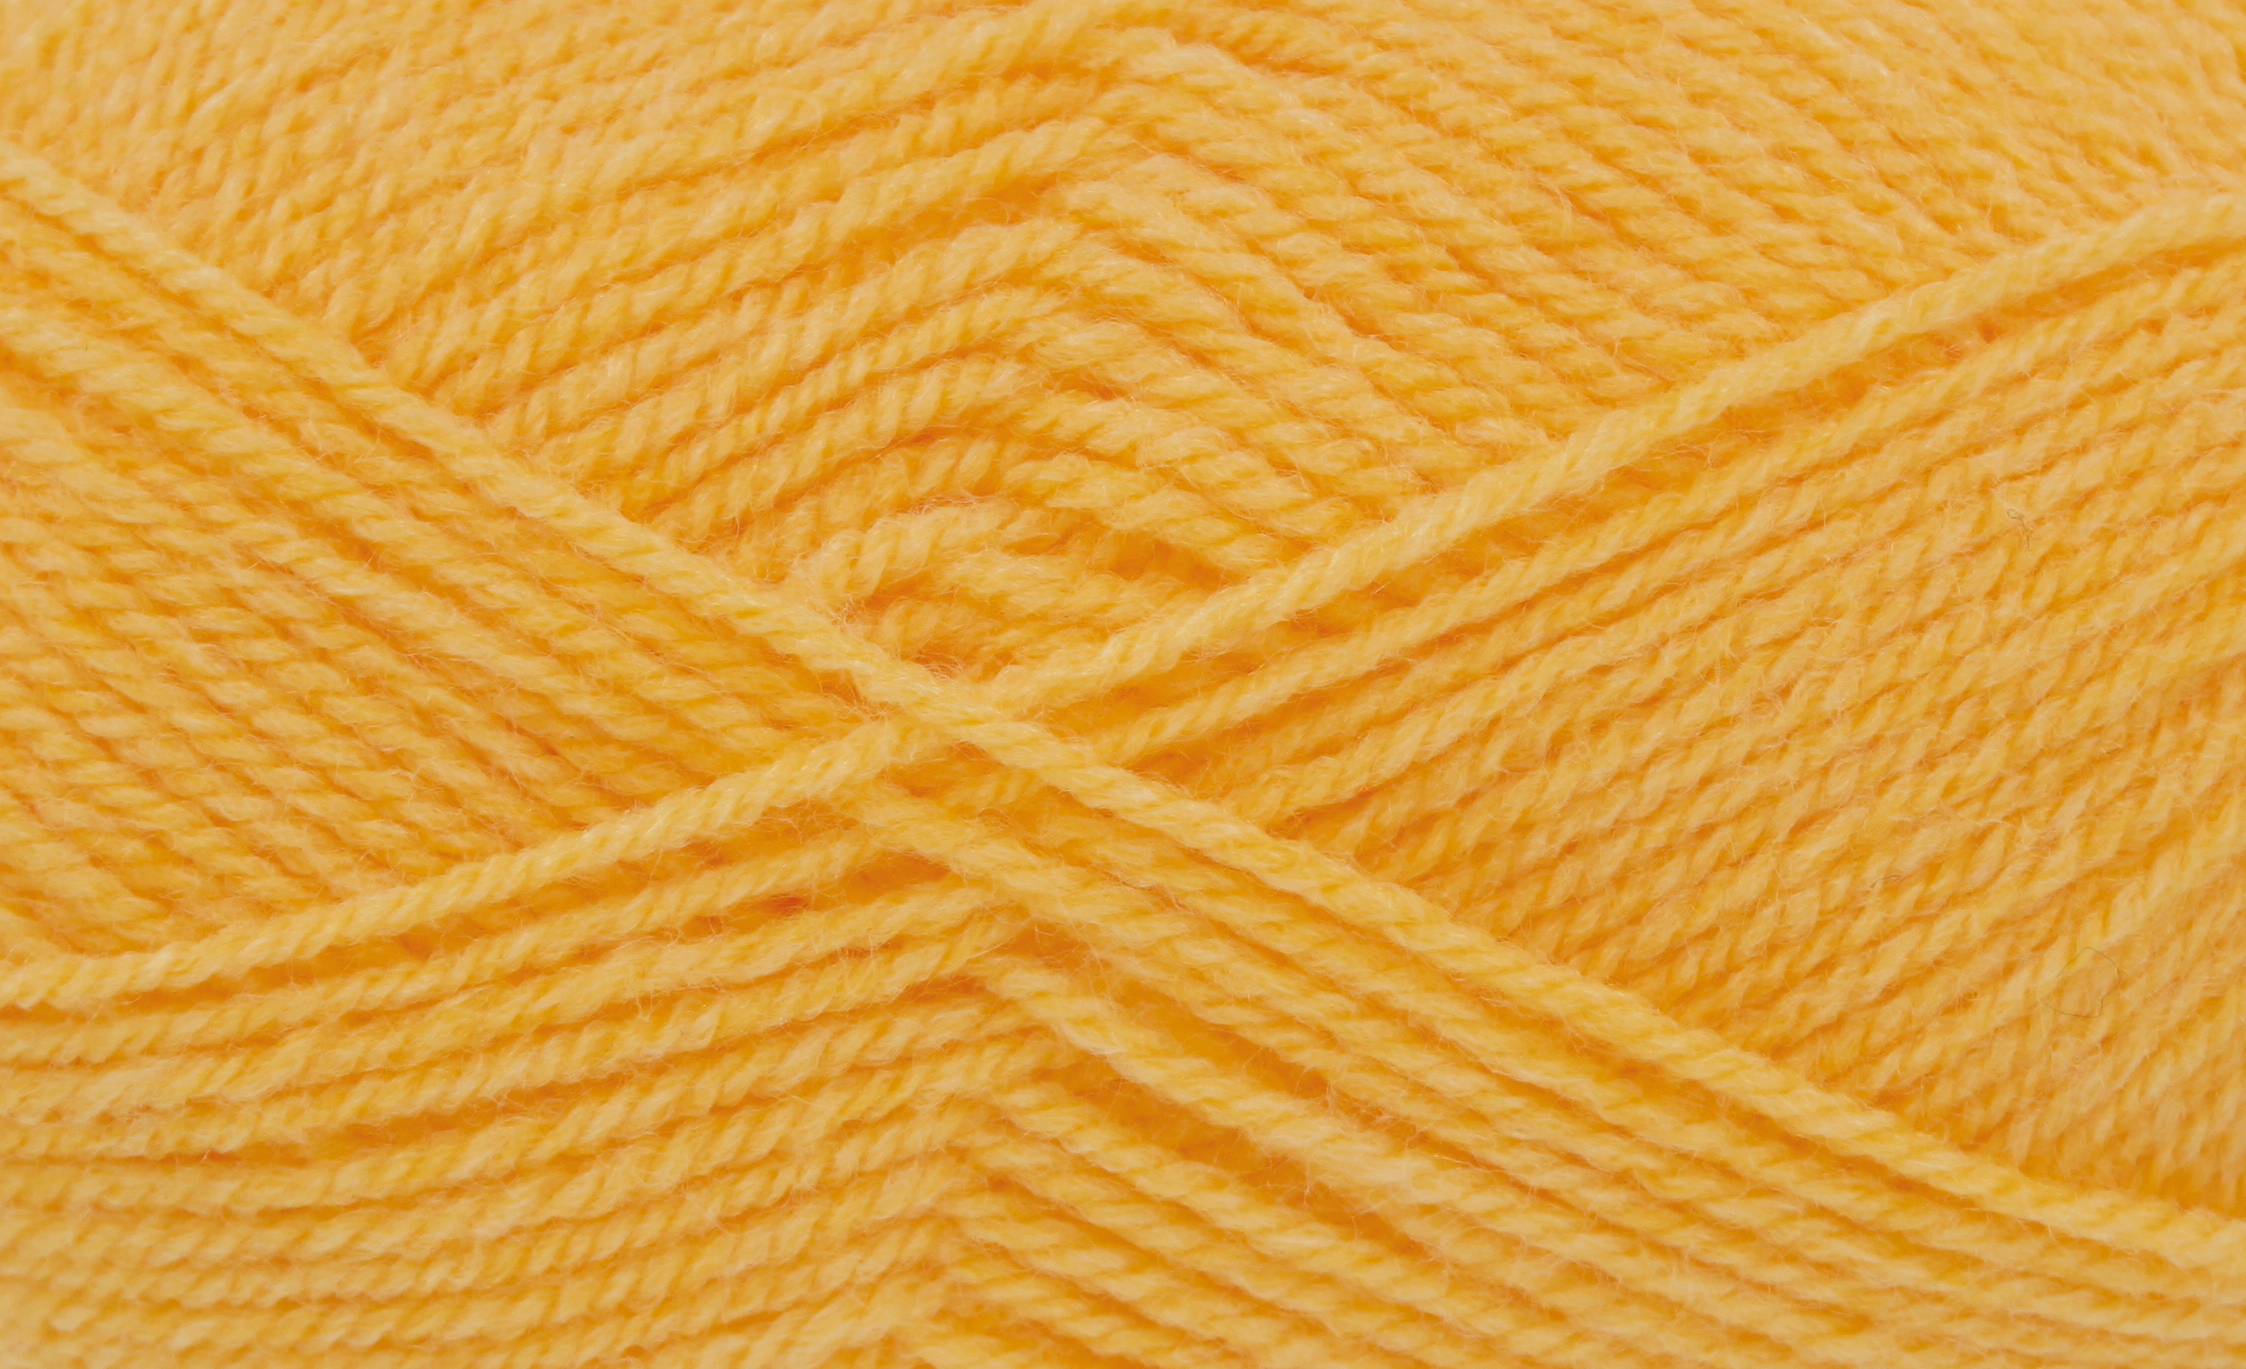 King Cole Big Value Double Knit Yarn - 50g